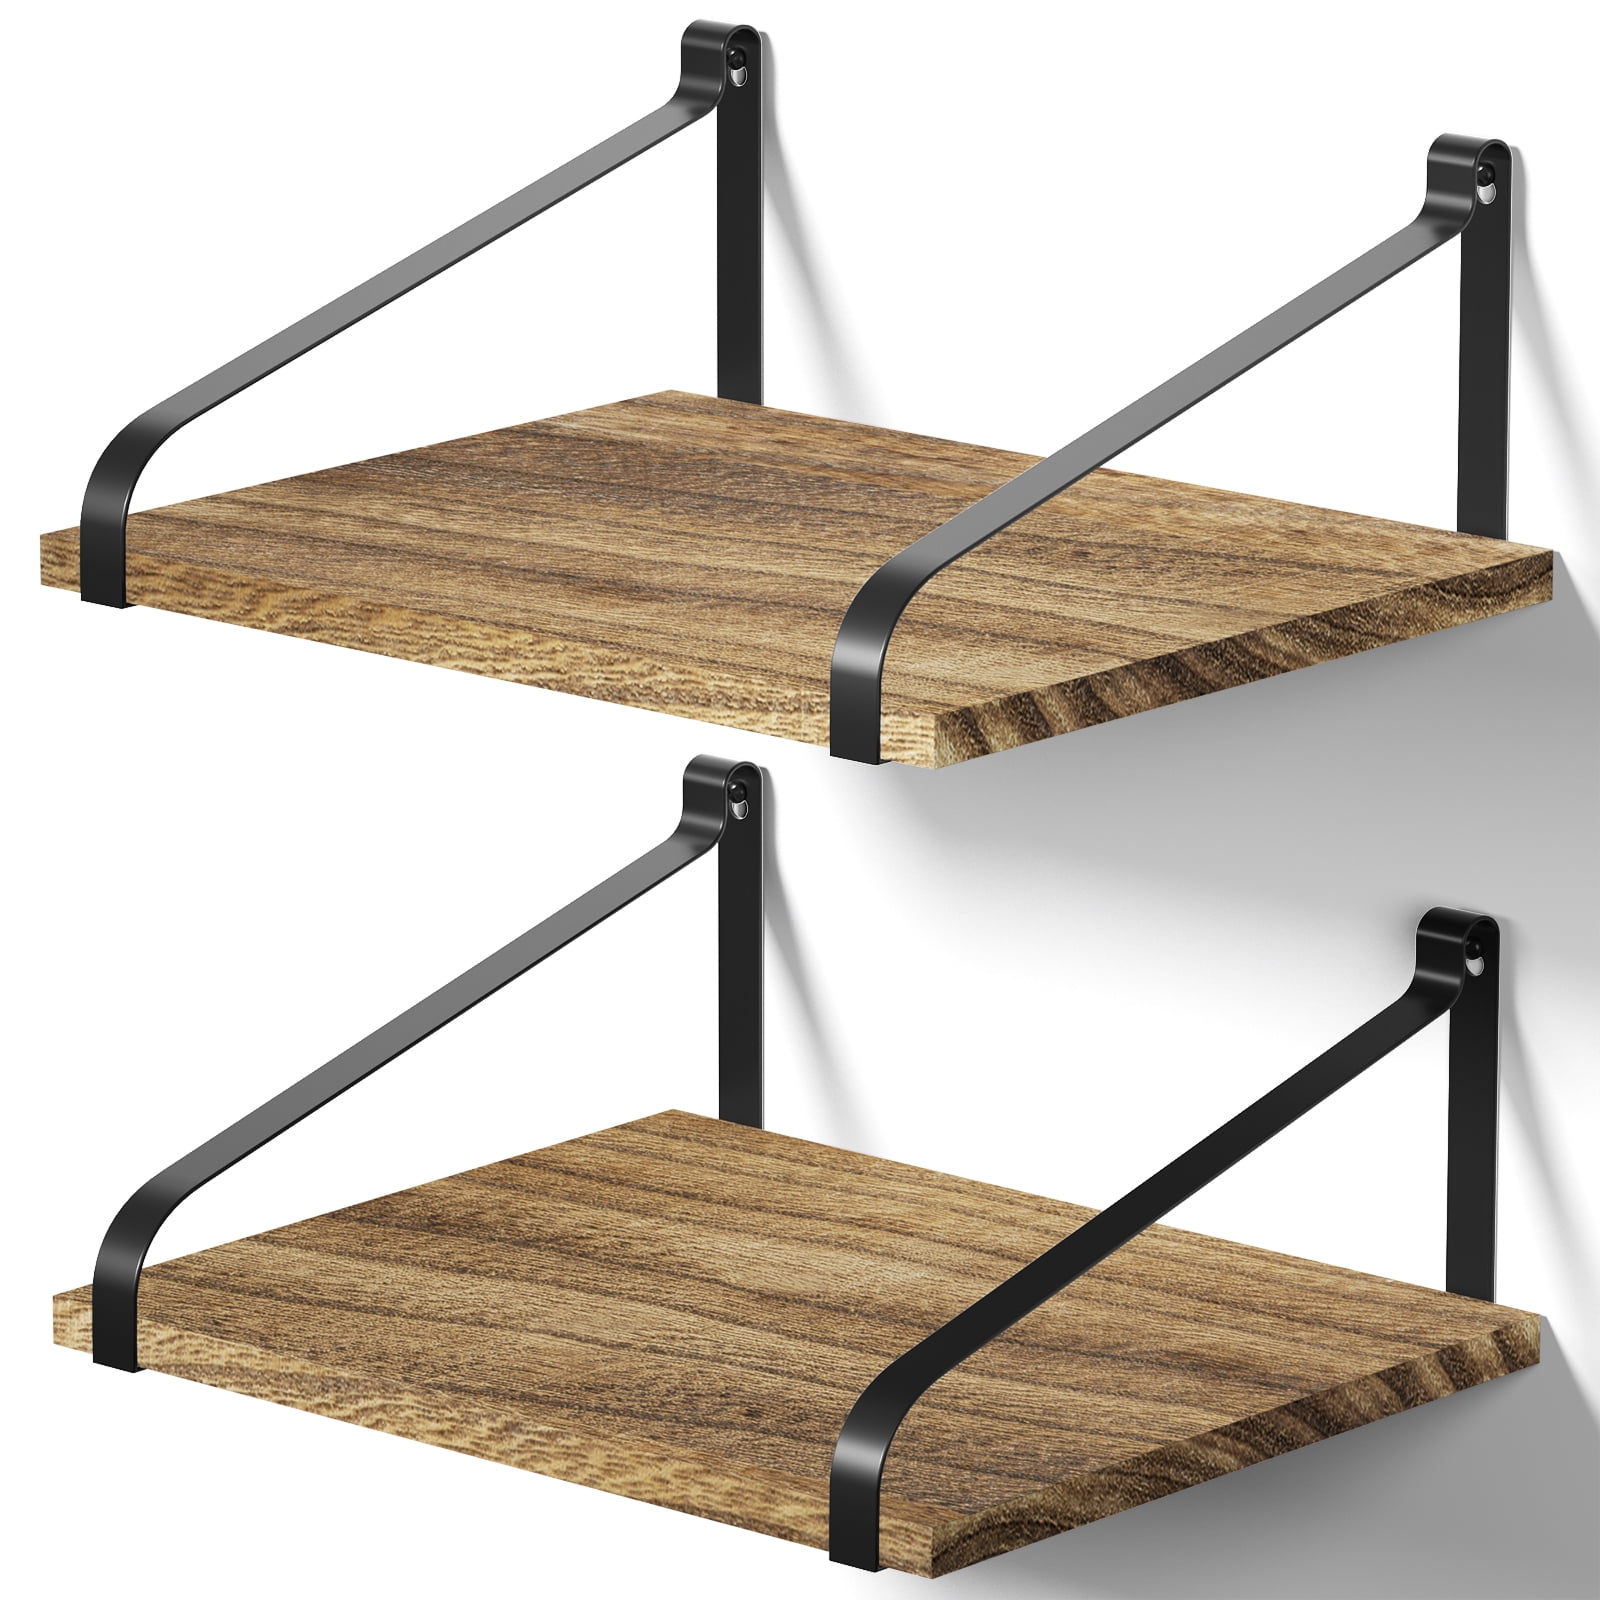 Details about   Love-KANKEI Floating Shelf Wall Shelf for Storage Rustic Wood Kitchen Spice Rack 